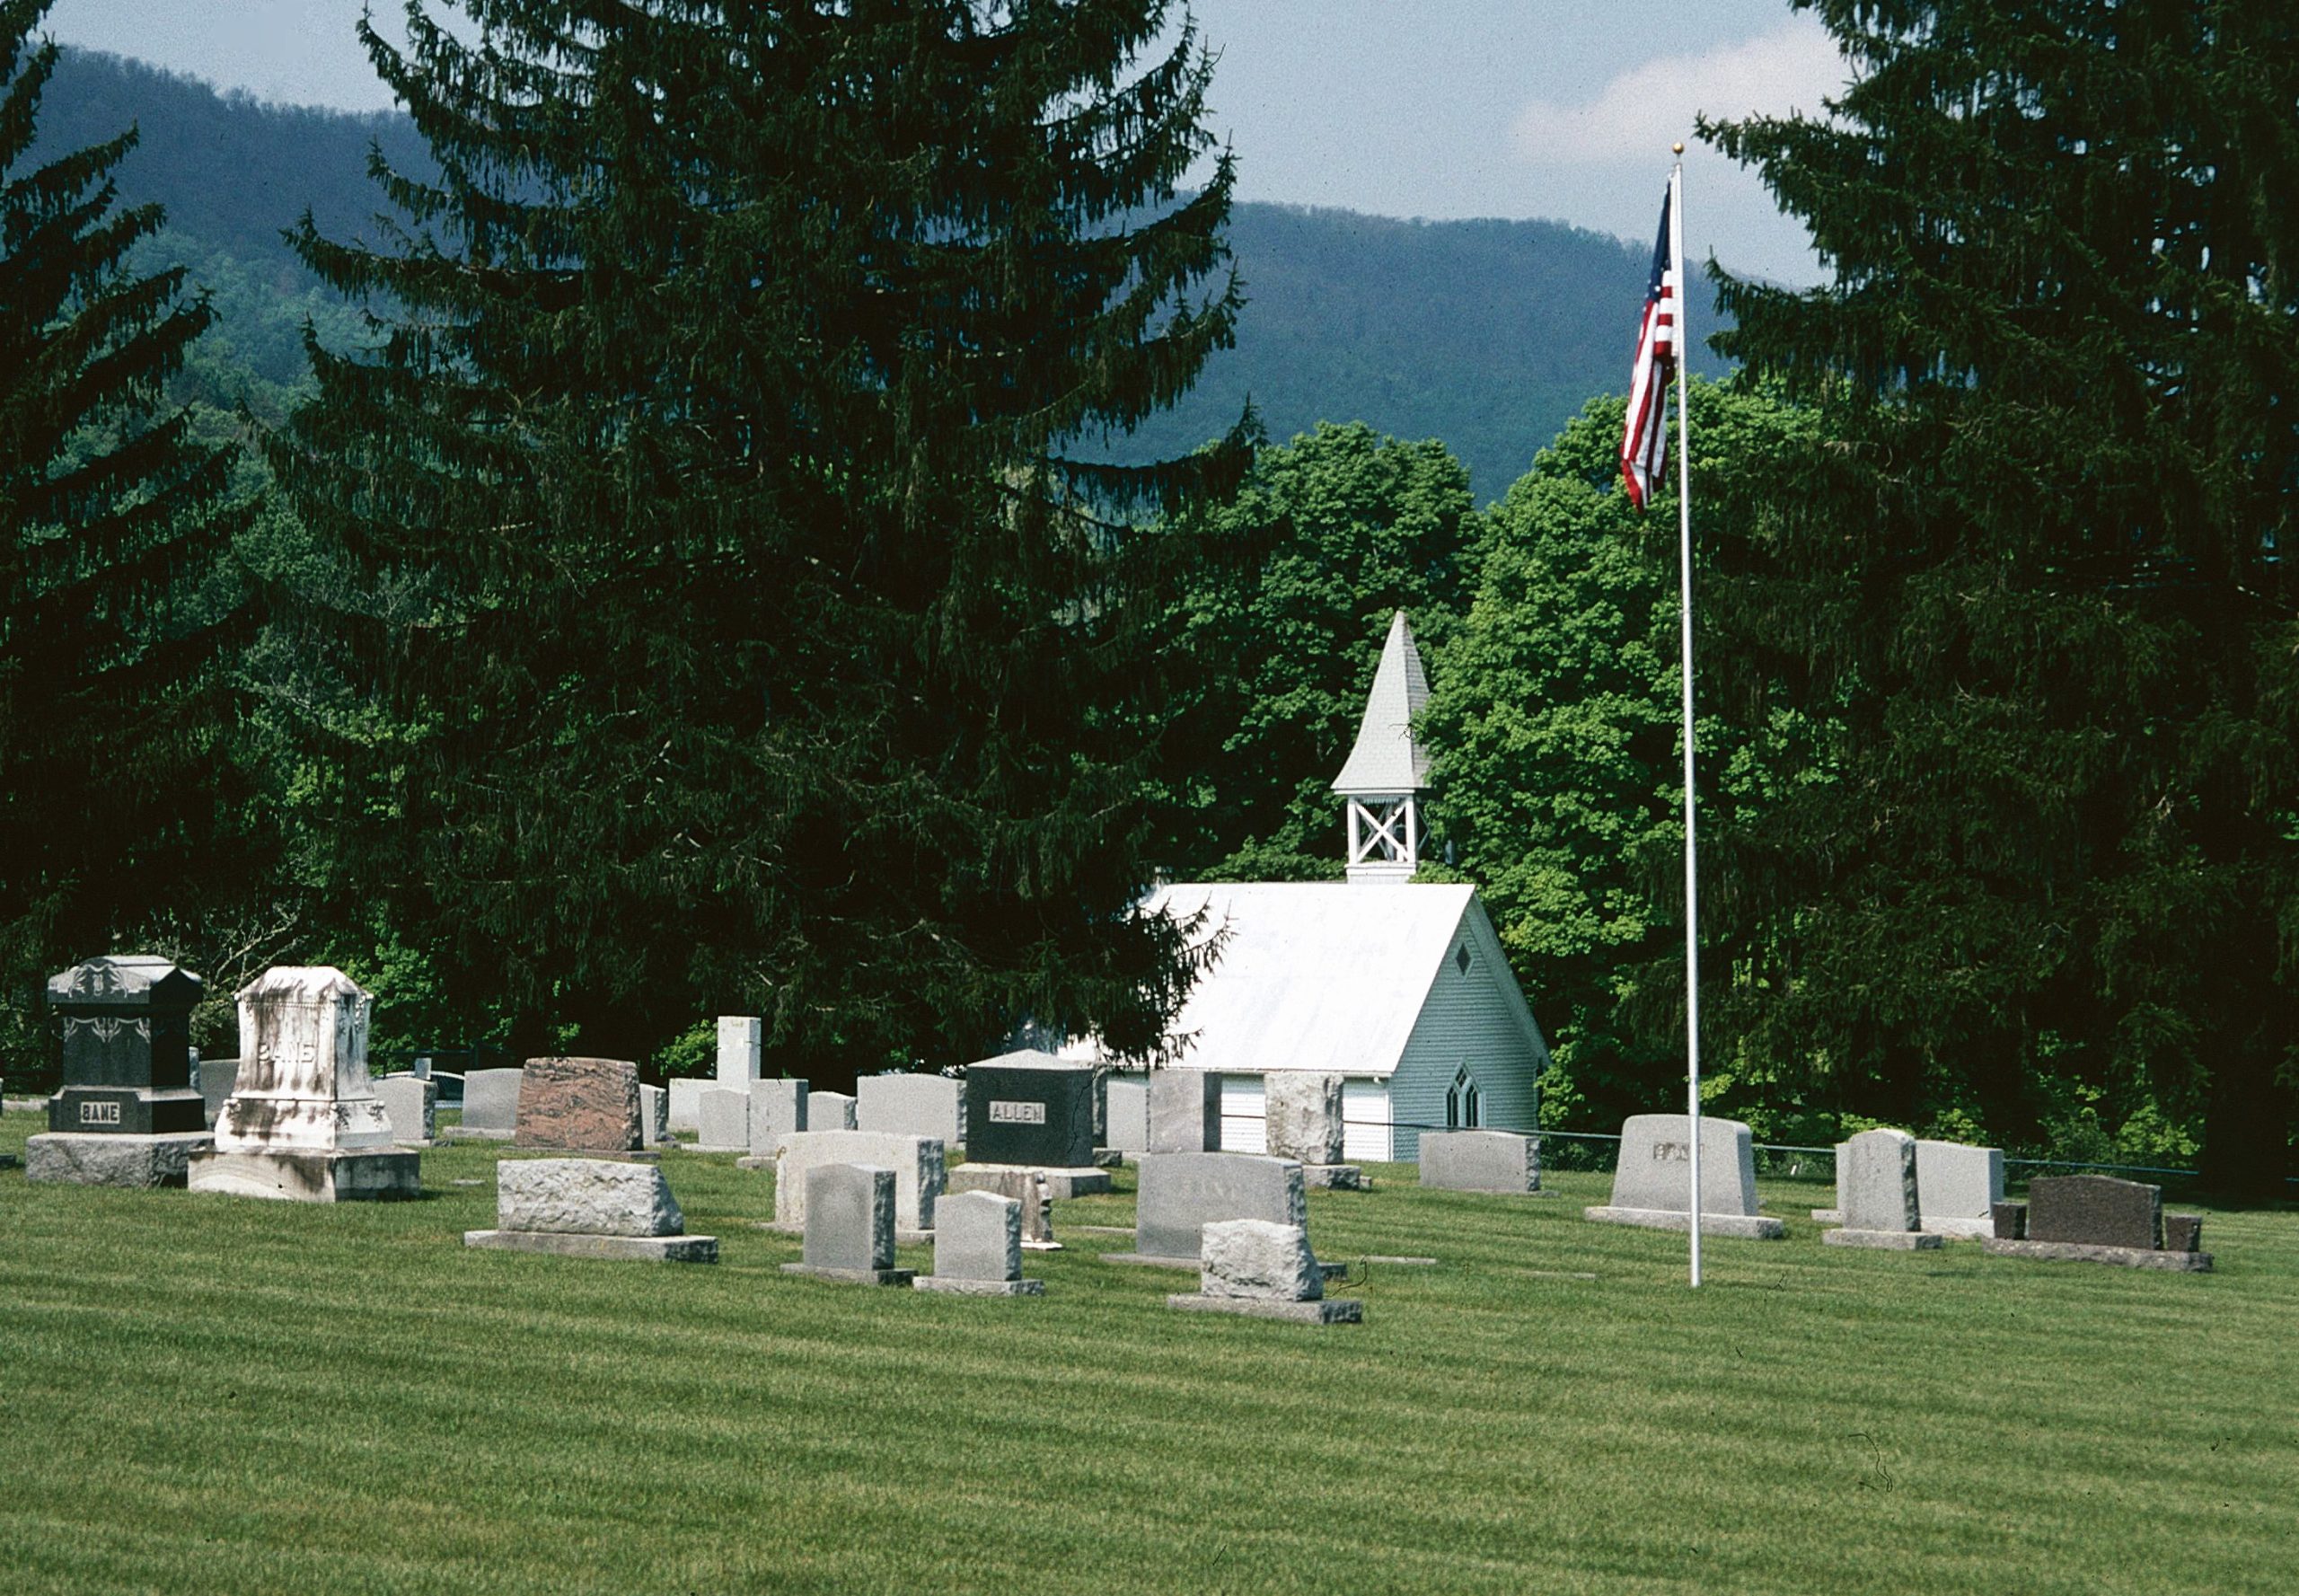 035-0420_Walkers_Creek_Church-and-Cemetery_2005_view_VLR_Online-DPezzoni-scaled